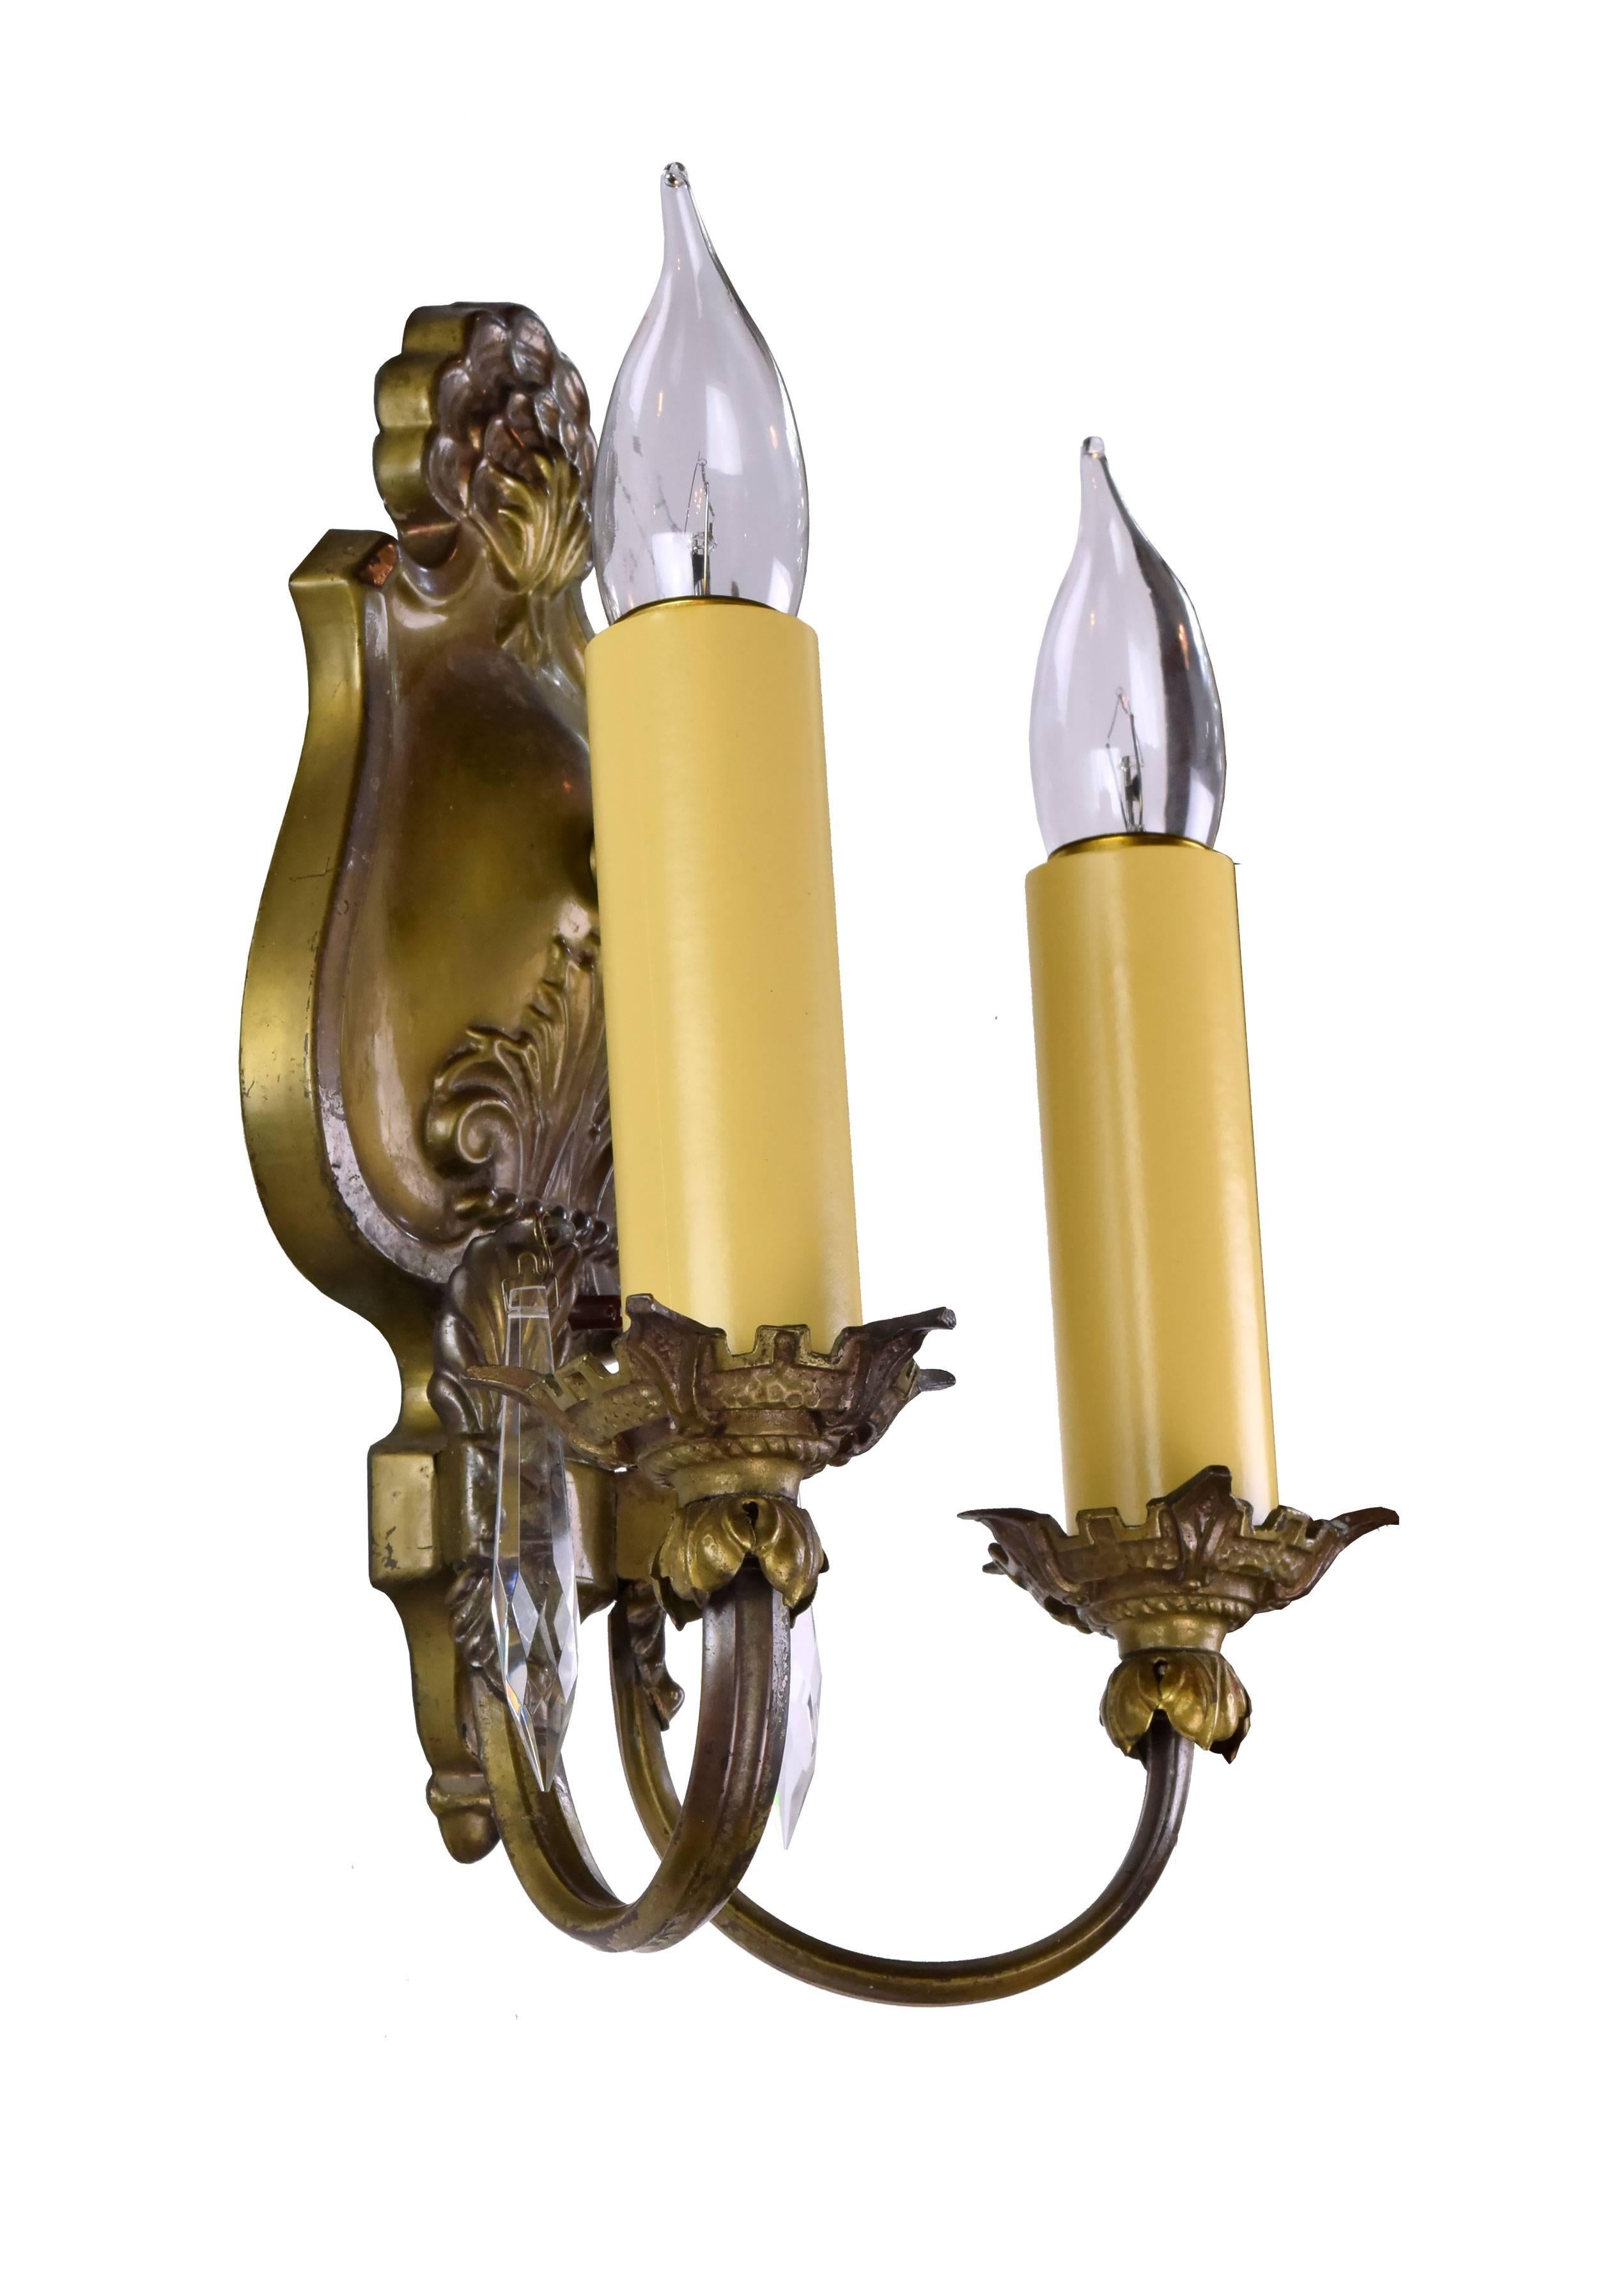 This elegant two-armed brass sconce features lavish organic details throughout, typical of the Beaux Arts movement. The pair of pointed crystals add another sumptuous touch to this beautiful fixture.


We find that early antique lighting was